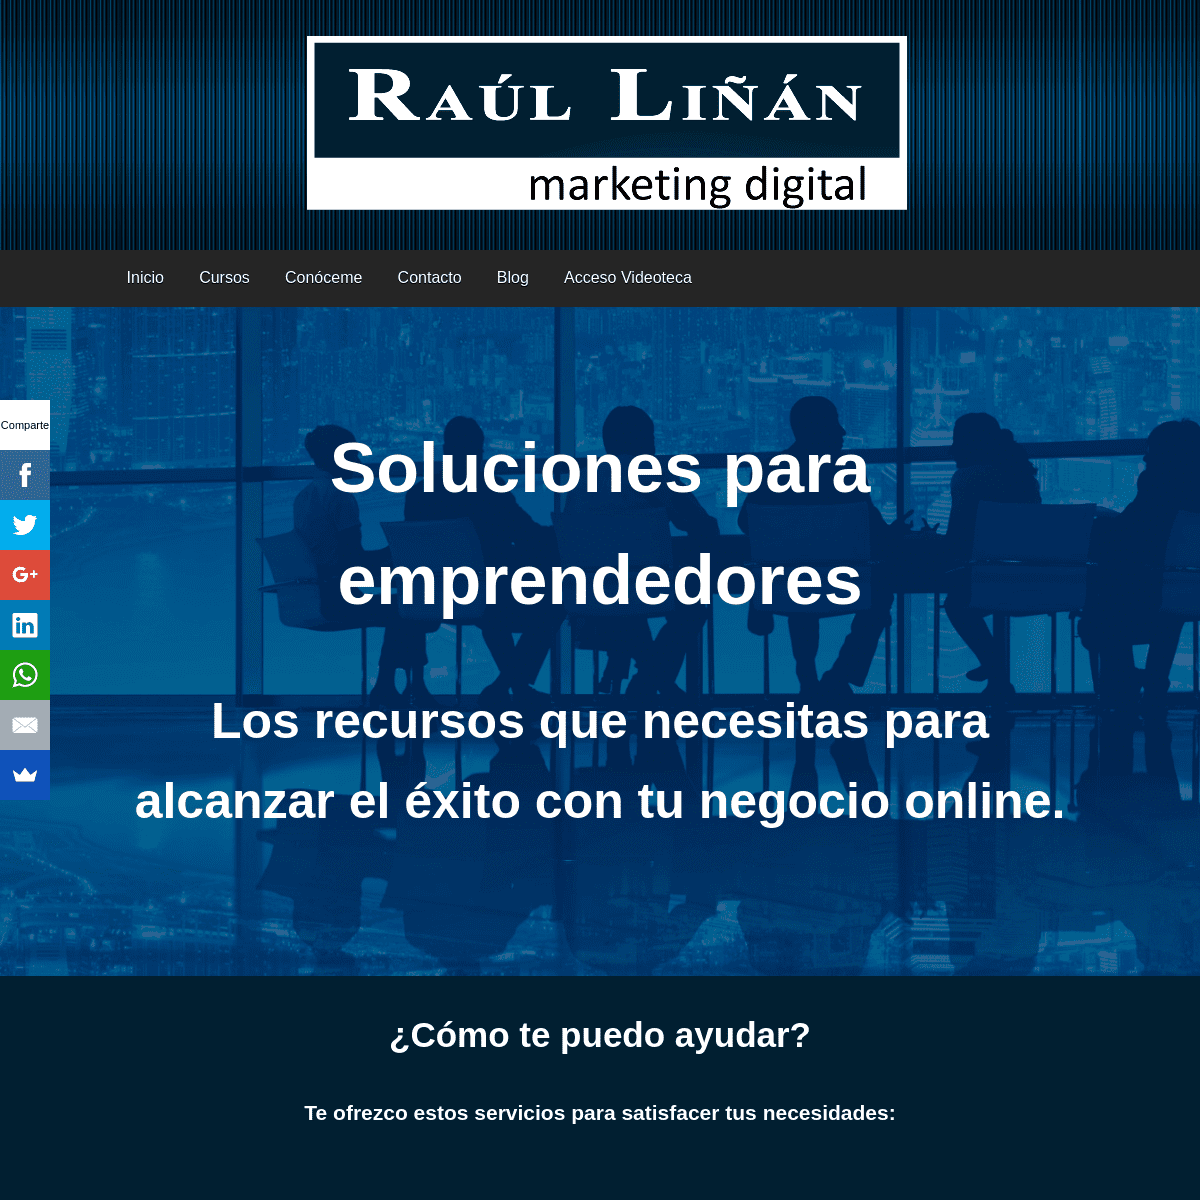 A complete backup of raul-linan.com